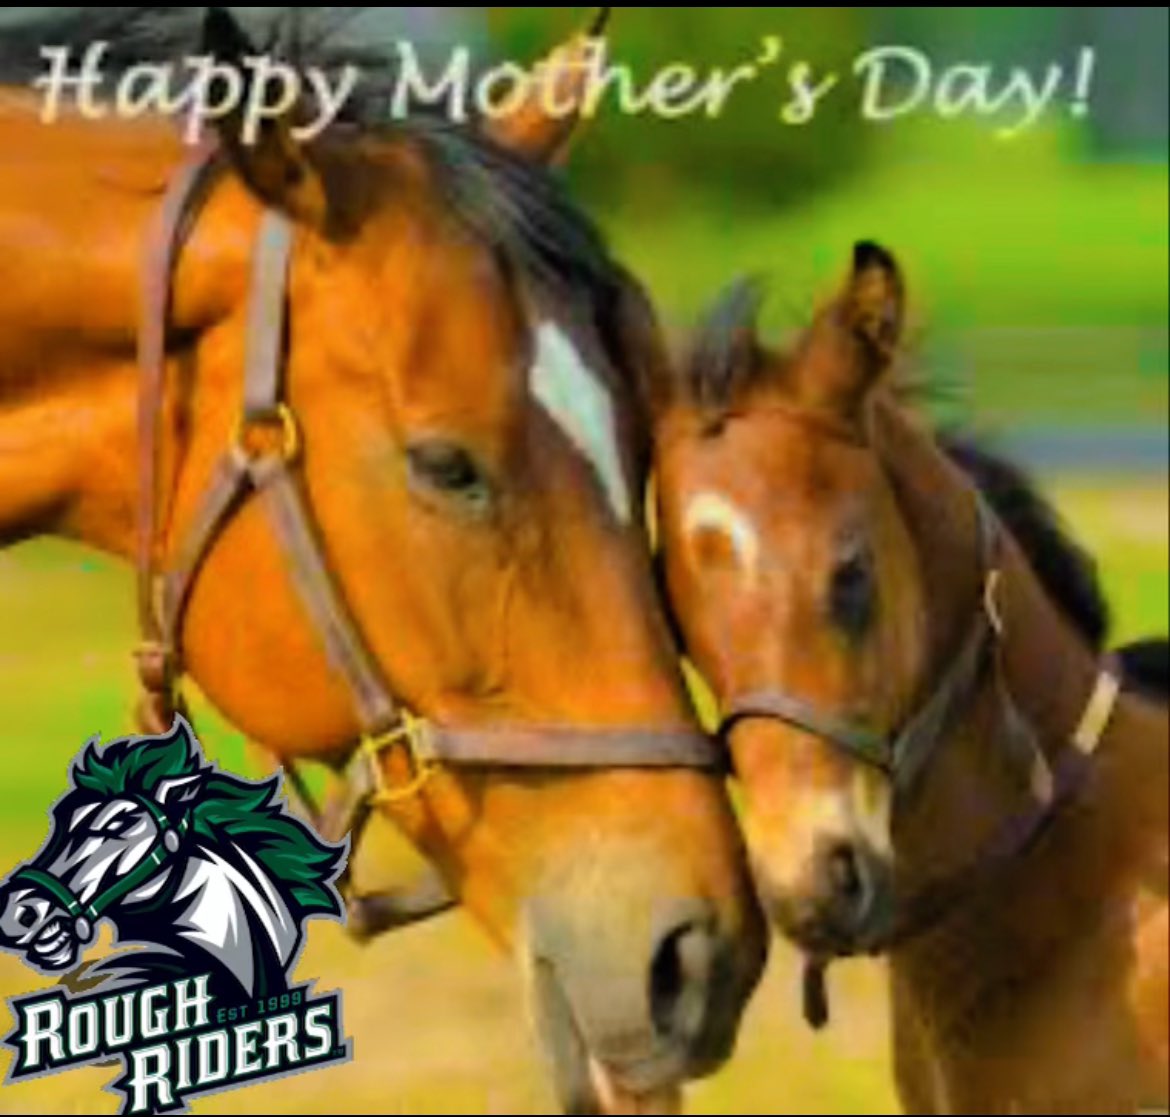 The RoughRiders would like to wish a very Happy Mother’s Day to Ridertown and a big thank you to all our wonderful billet mothers present and past. You and your families are so instrumental to our organization. #mothersday #ridersfamily #ponyup